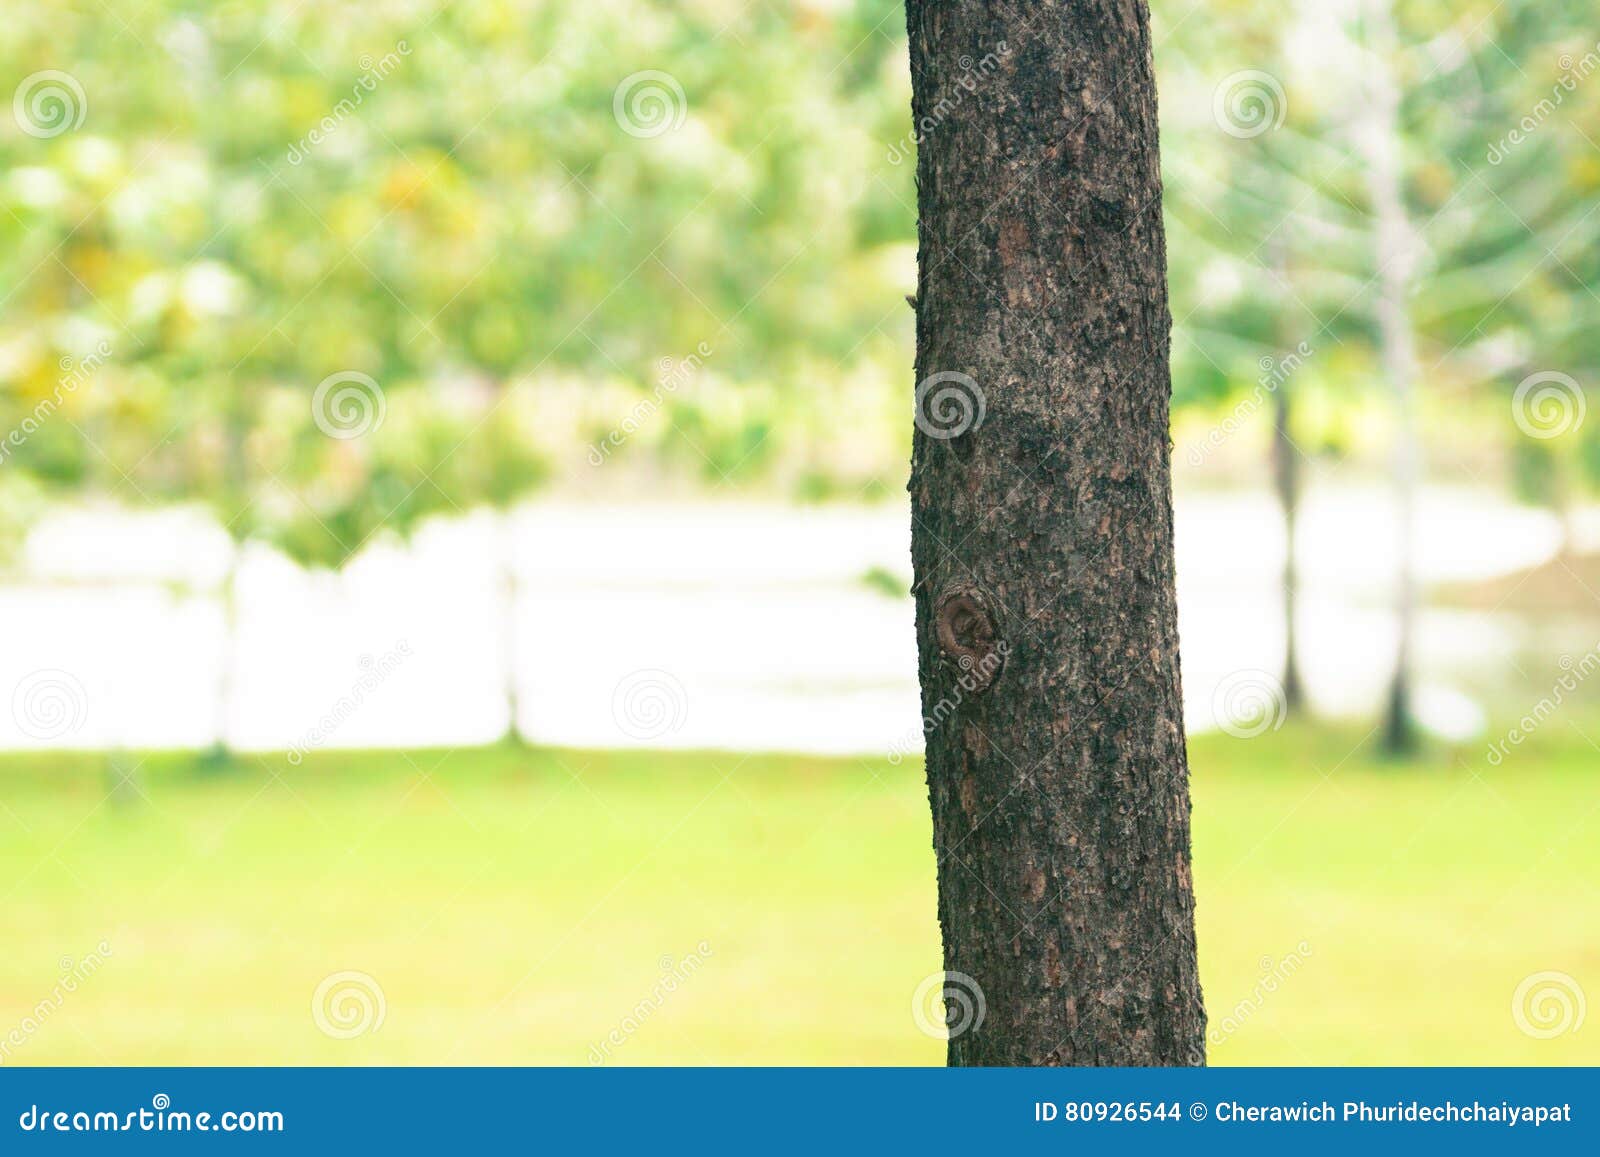 Tree Blur Background in Park of Thailand Stock Photo - Image of blur,  gardens: 80926544